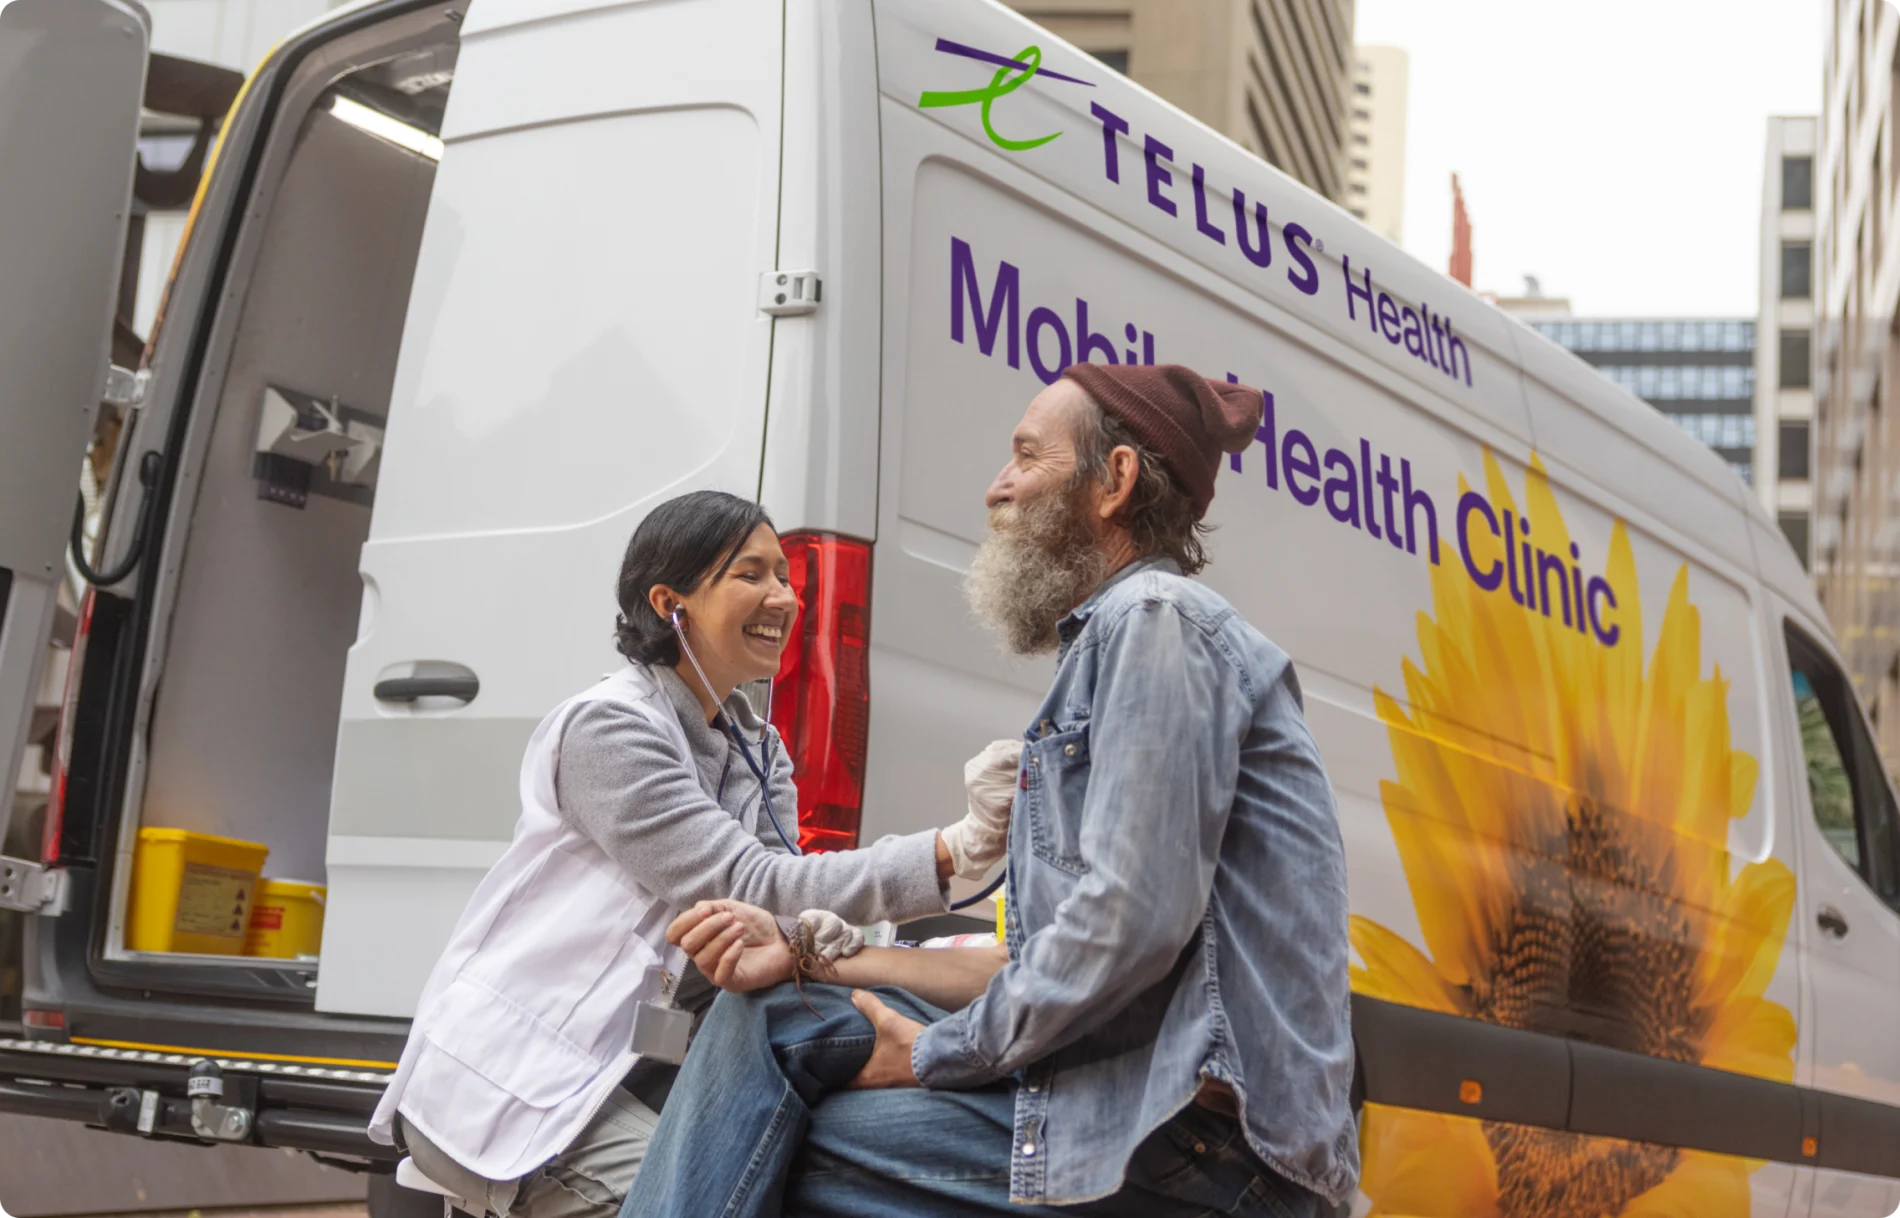 A TELUS Health for Good Mobile Clinic team member treating a patient